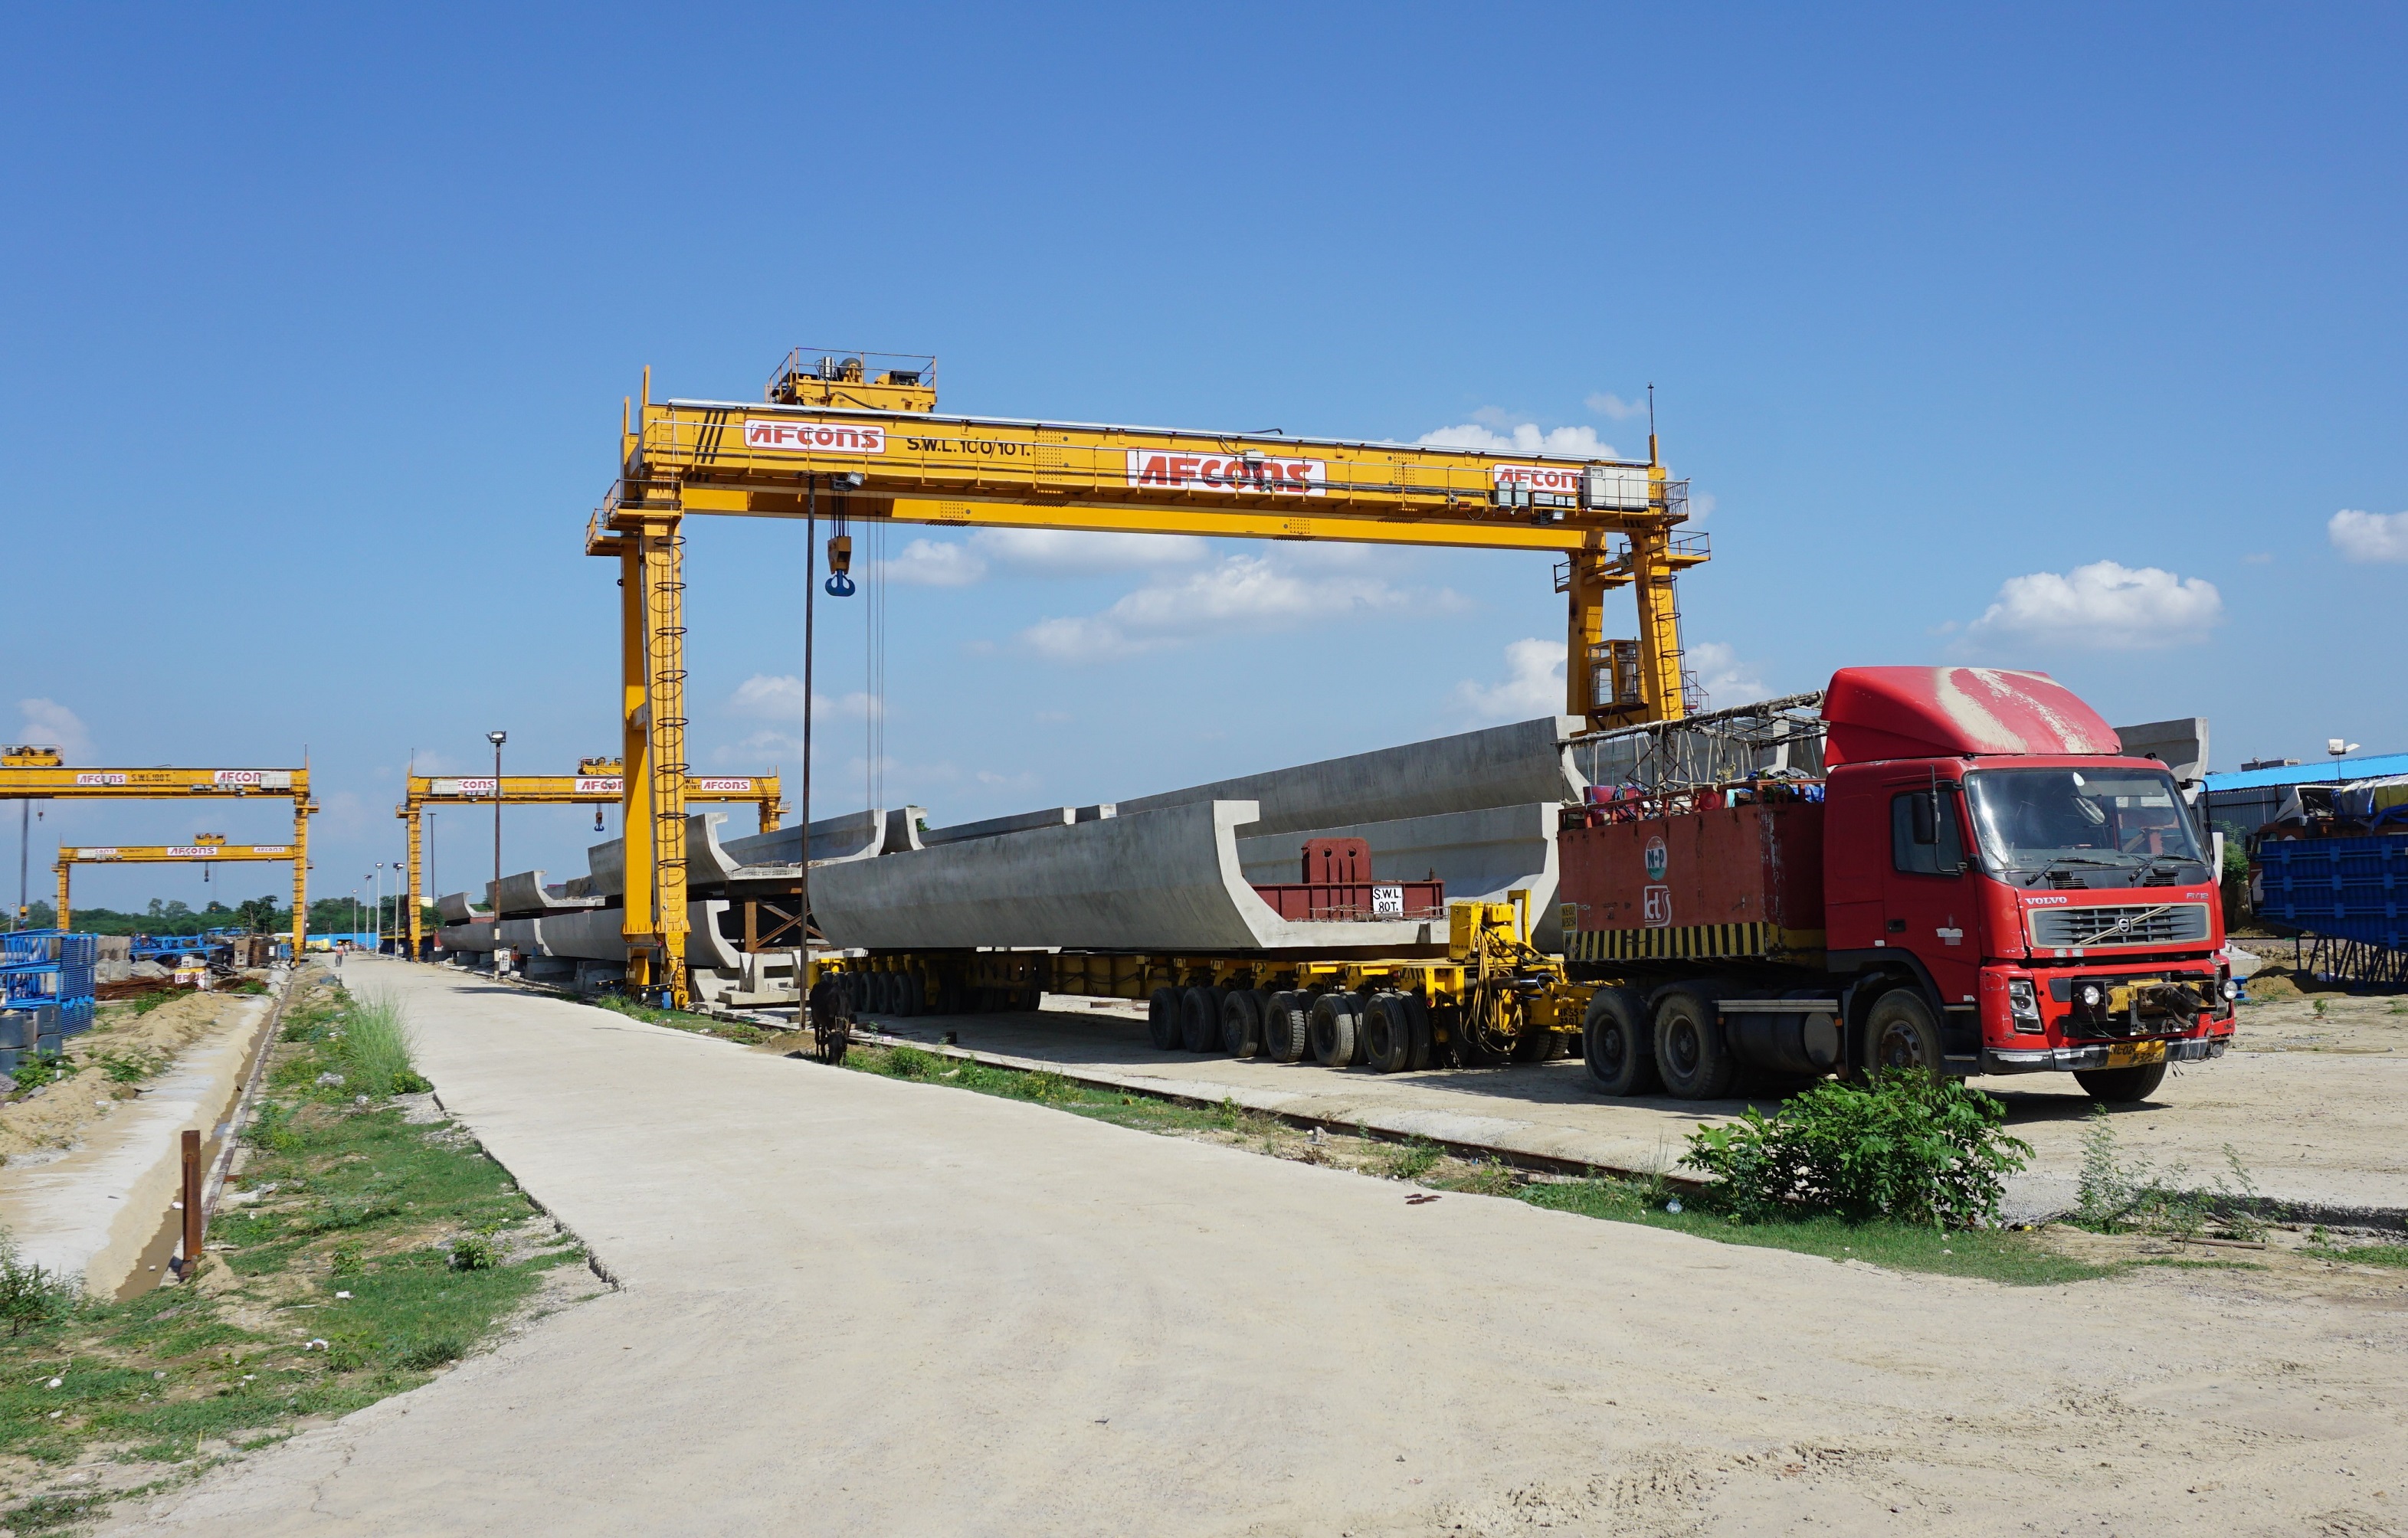 1st U-Girder for erection placed on multi-axle trailer at Casting Yard for trial runs